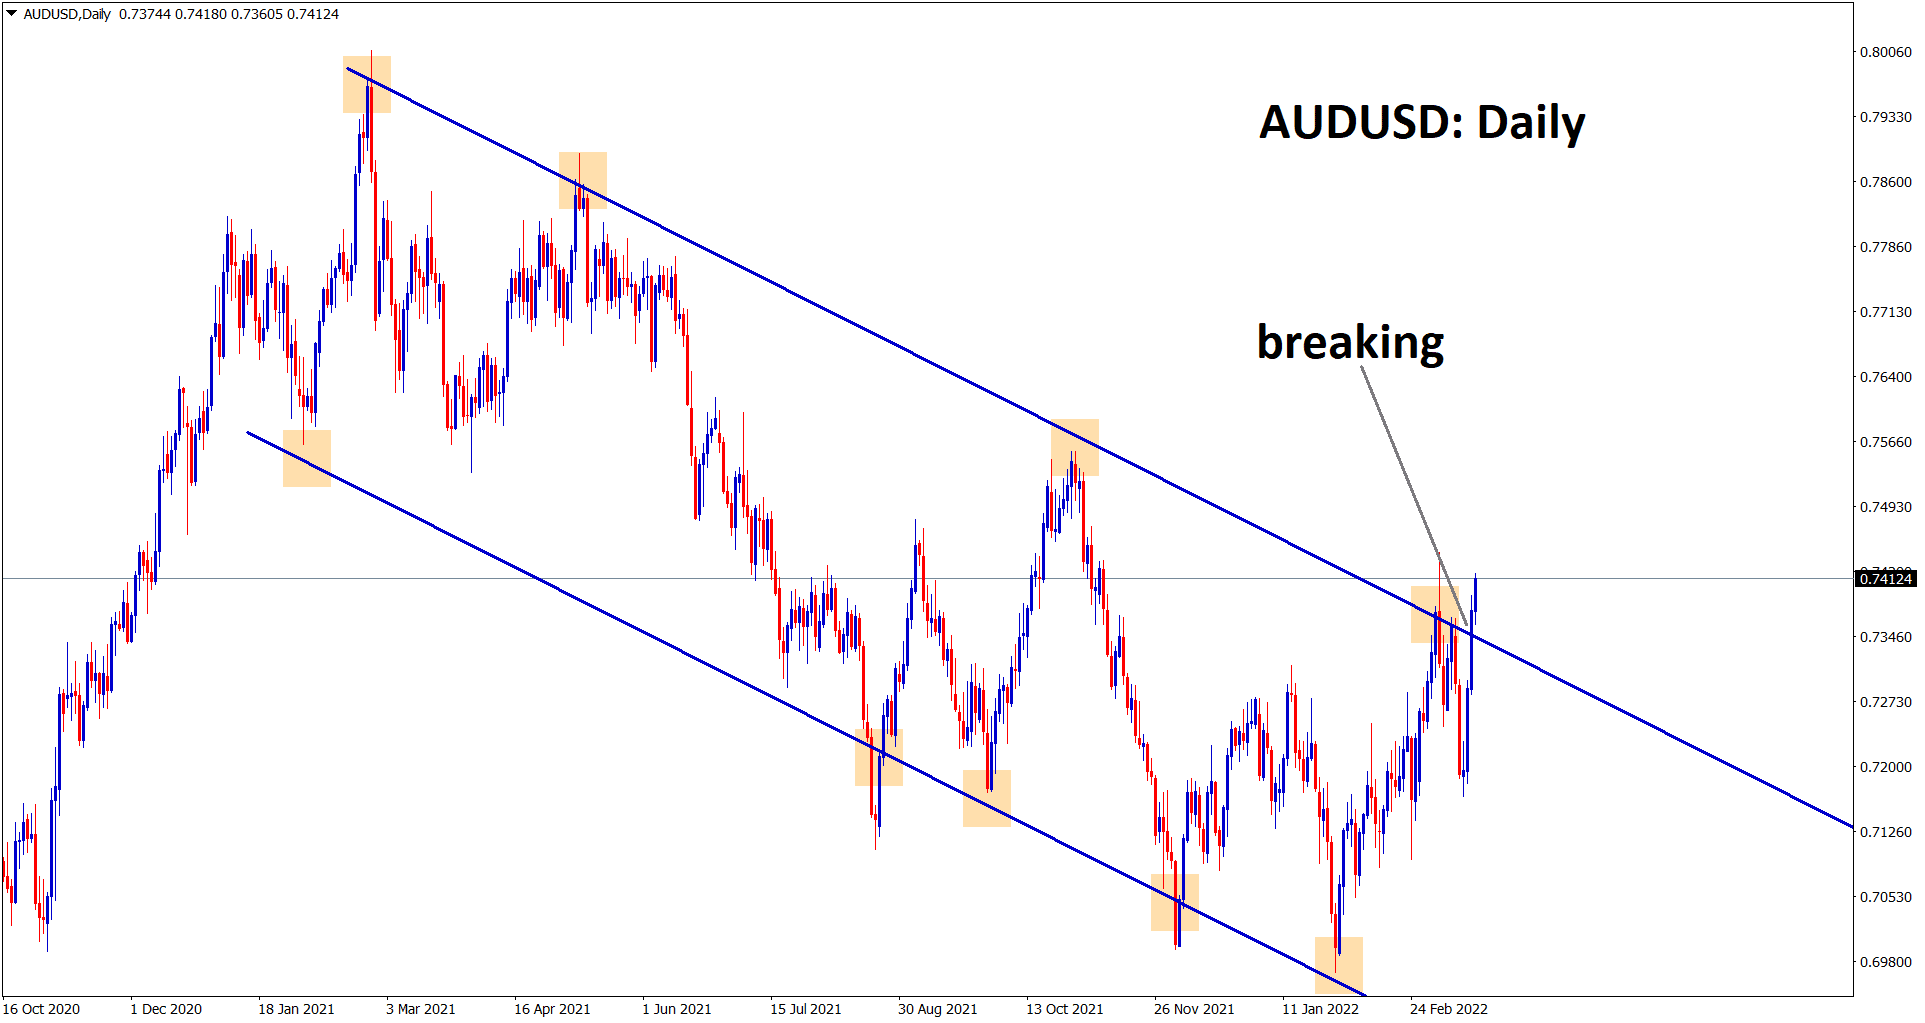 AUDUSD is breaking the top of the downtrend line in the daily timeframe